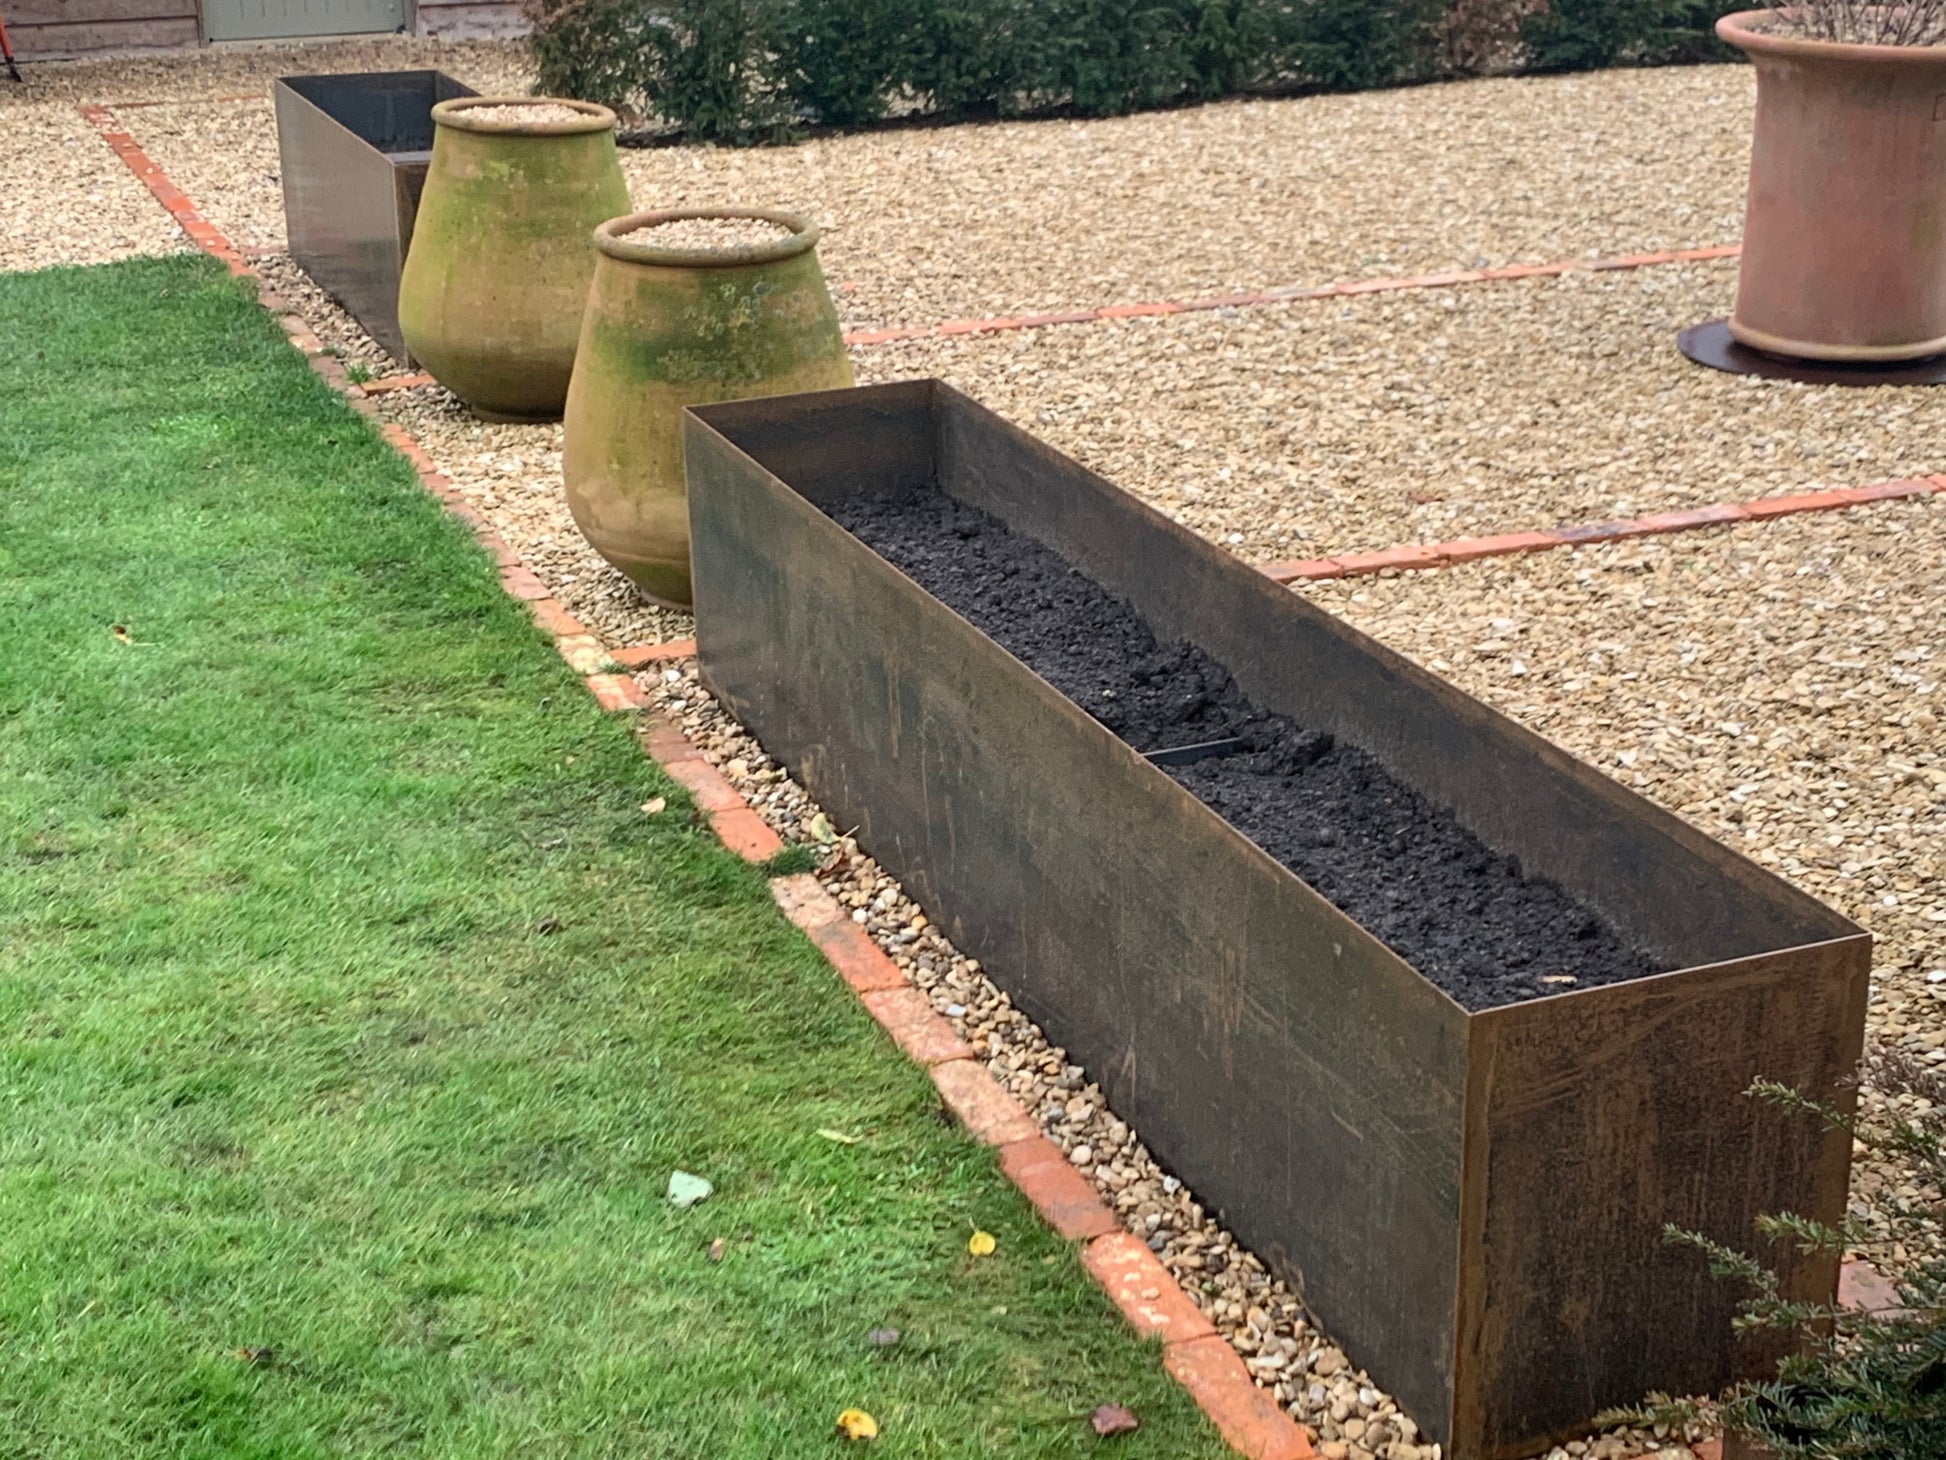 Raised beds support